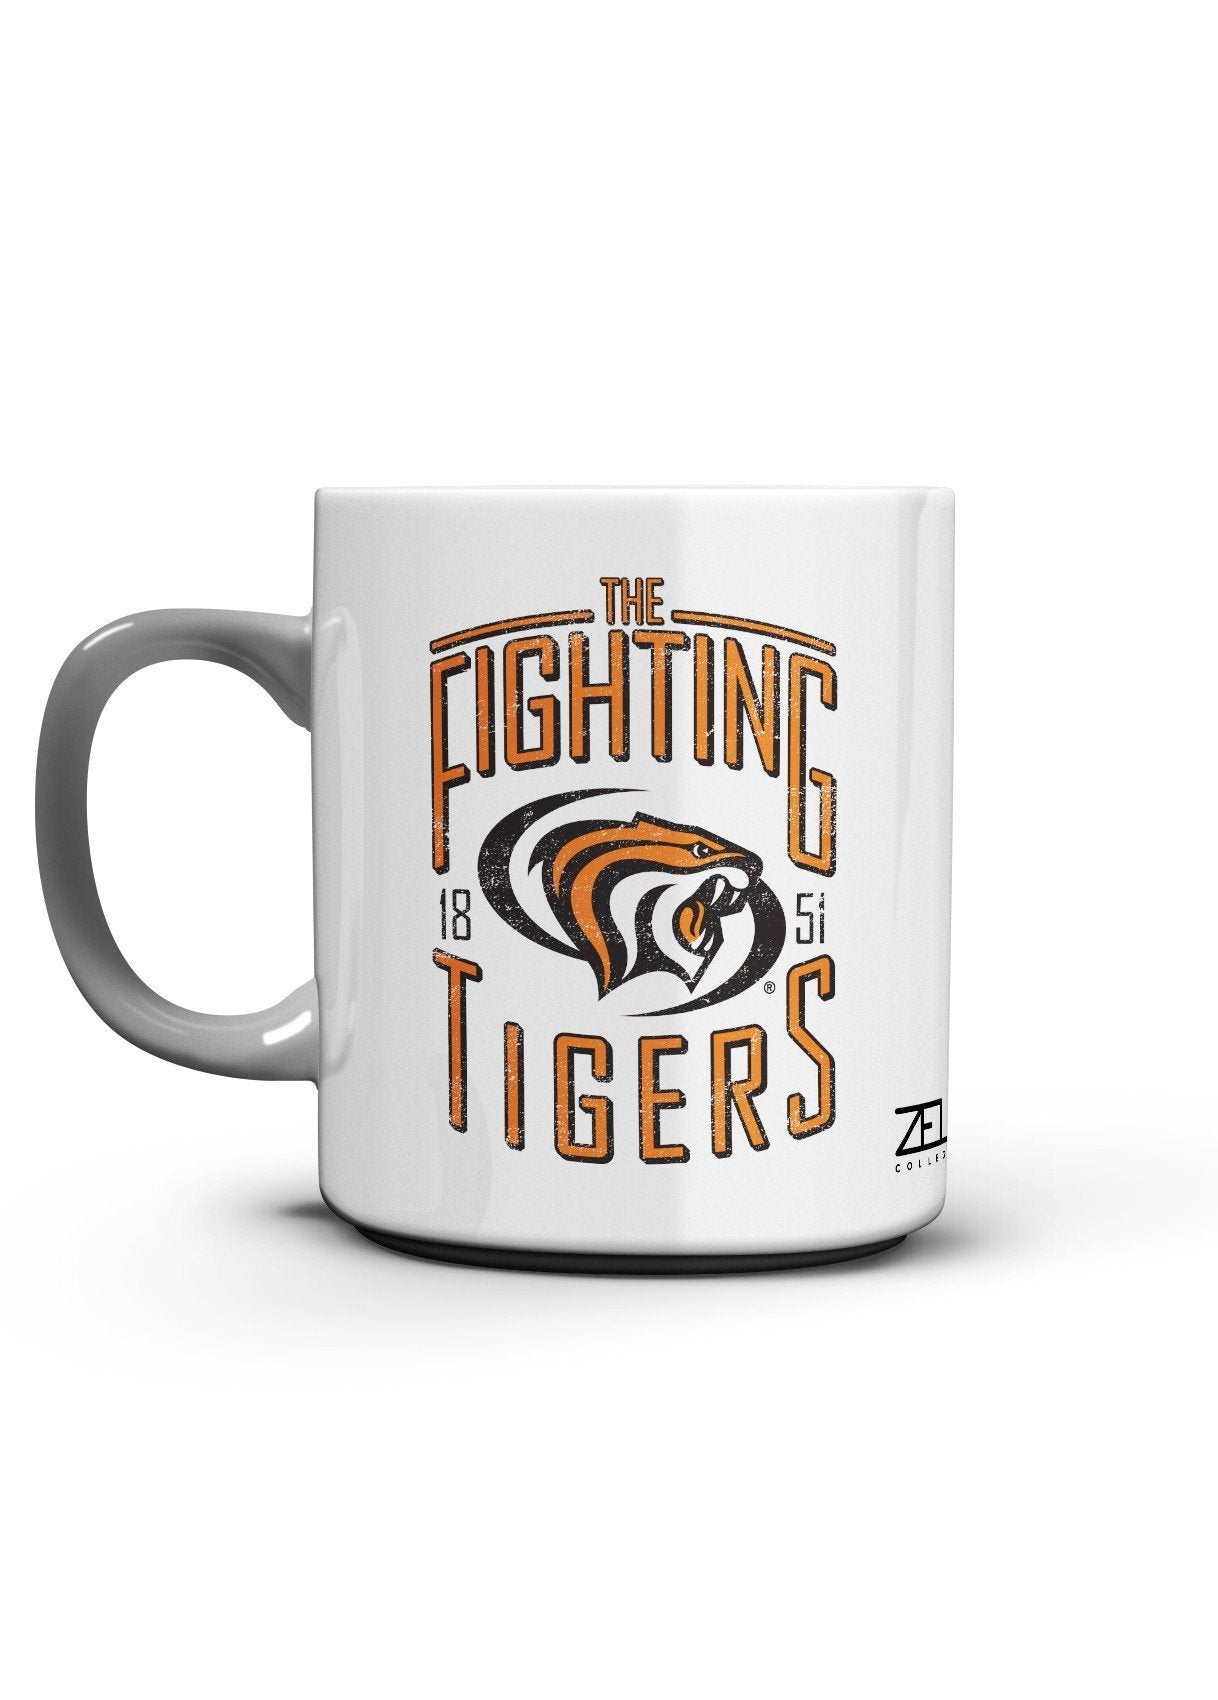 University of the Pacific Tigers Fighting Tigers Mug by Zeus Collegiate